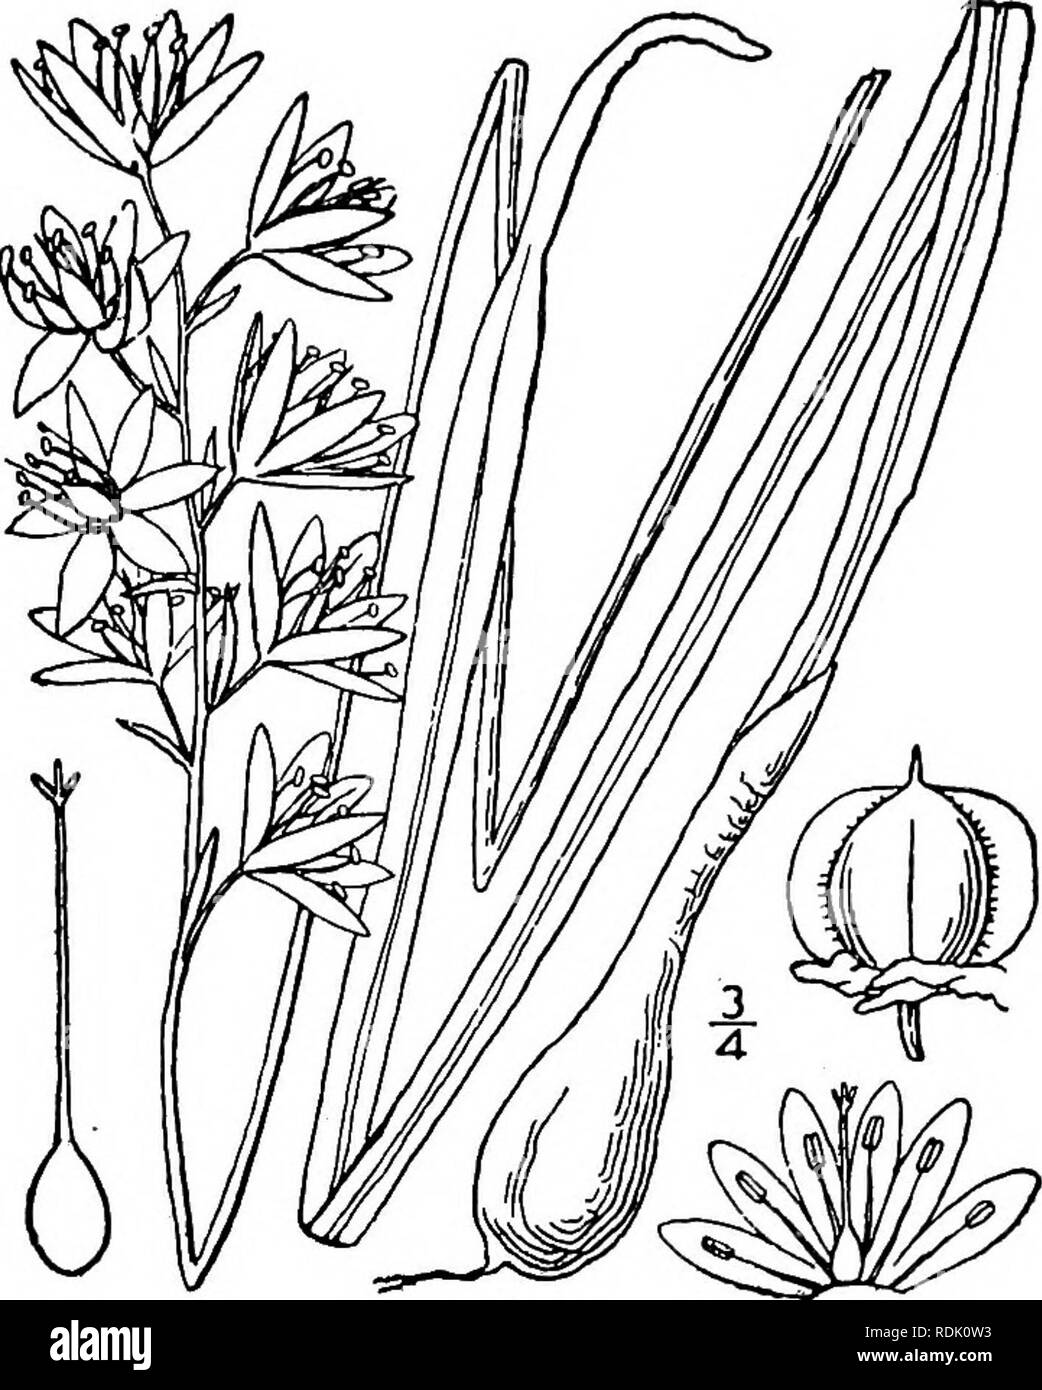 . An illustrated flora of the northern United States, Canada and the British possessions, from Newfoundland to the parallel of the southern boundary of Virginia, and from the Atlantic Ocean westward to the 102d meridian. Botany; Botany. Genus ii. LILY FAMILY. 5°9 1. Quamasia hyacinthina (Raf.) Brit- ton. Wild Hyacinth. Fig. 1271. Scilla esculenta Ker, Bot. Mag. pi. 1754. 1813. Lemotrys hyacinthina Raf. Fl. Tell. 3: 51. 1836. Scilla Fraseri A. Gray, Man. Ed. 2, 469. 1856. Camassia Fraseri Torr. Pac. R. R. Rep. 4: 147. 1857- Quamasia esculenta Coville, Proc. Biol. Soc. Wash. 11: 64. 1897. Not Ra Stock Photo